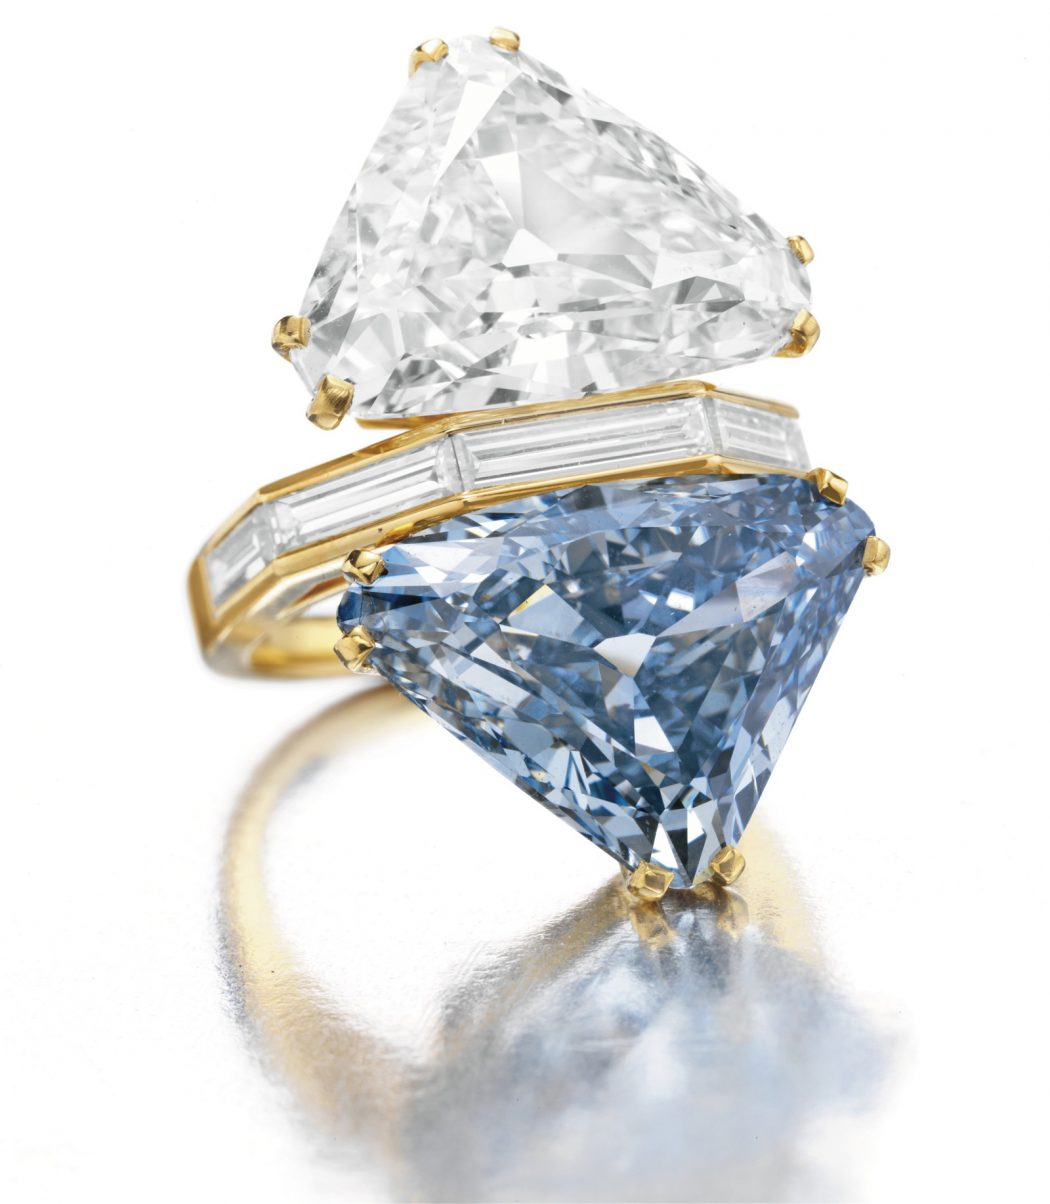 the-bvlgari-blue-diamond-2 What Do You Say about These Rare and Precious Rings?!